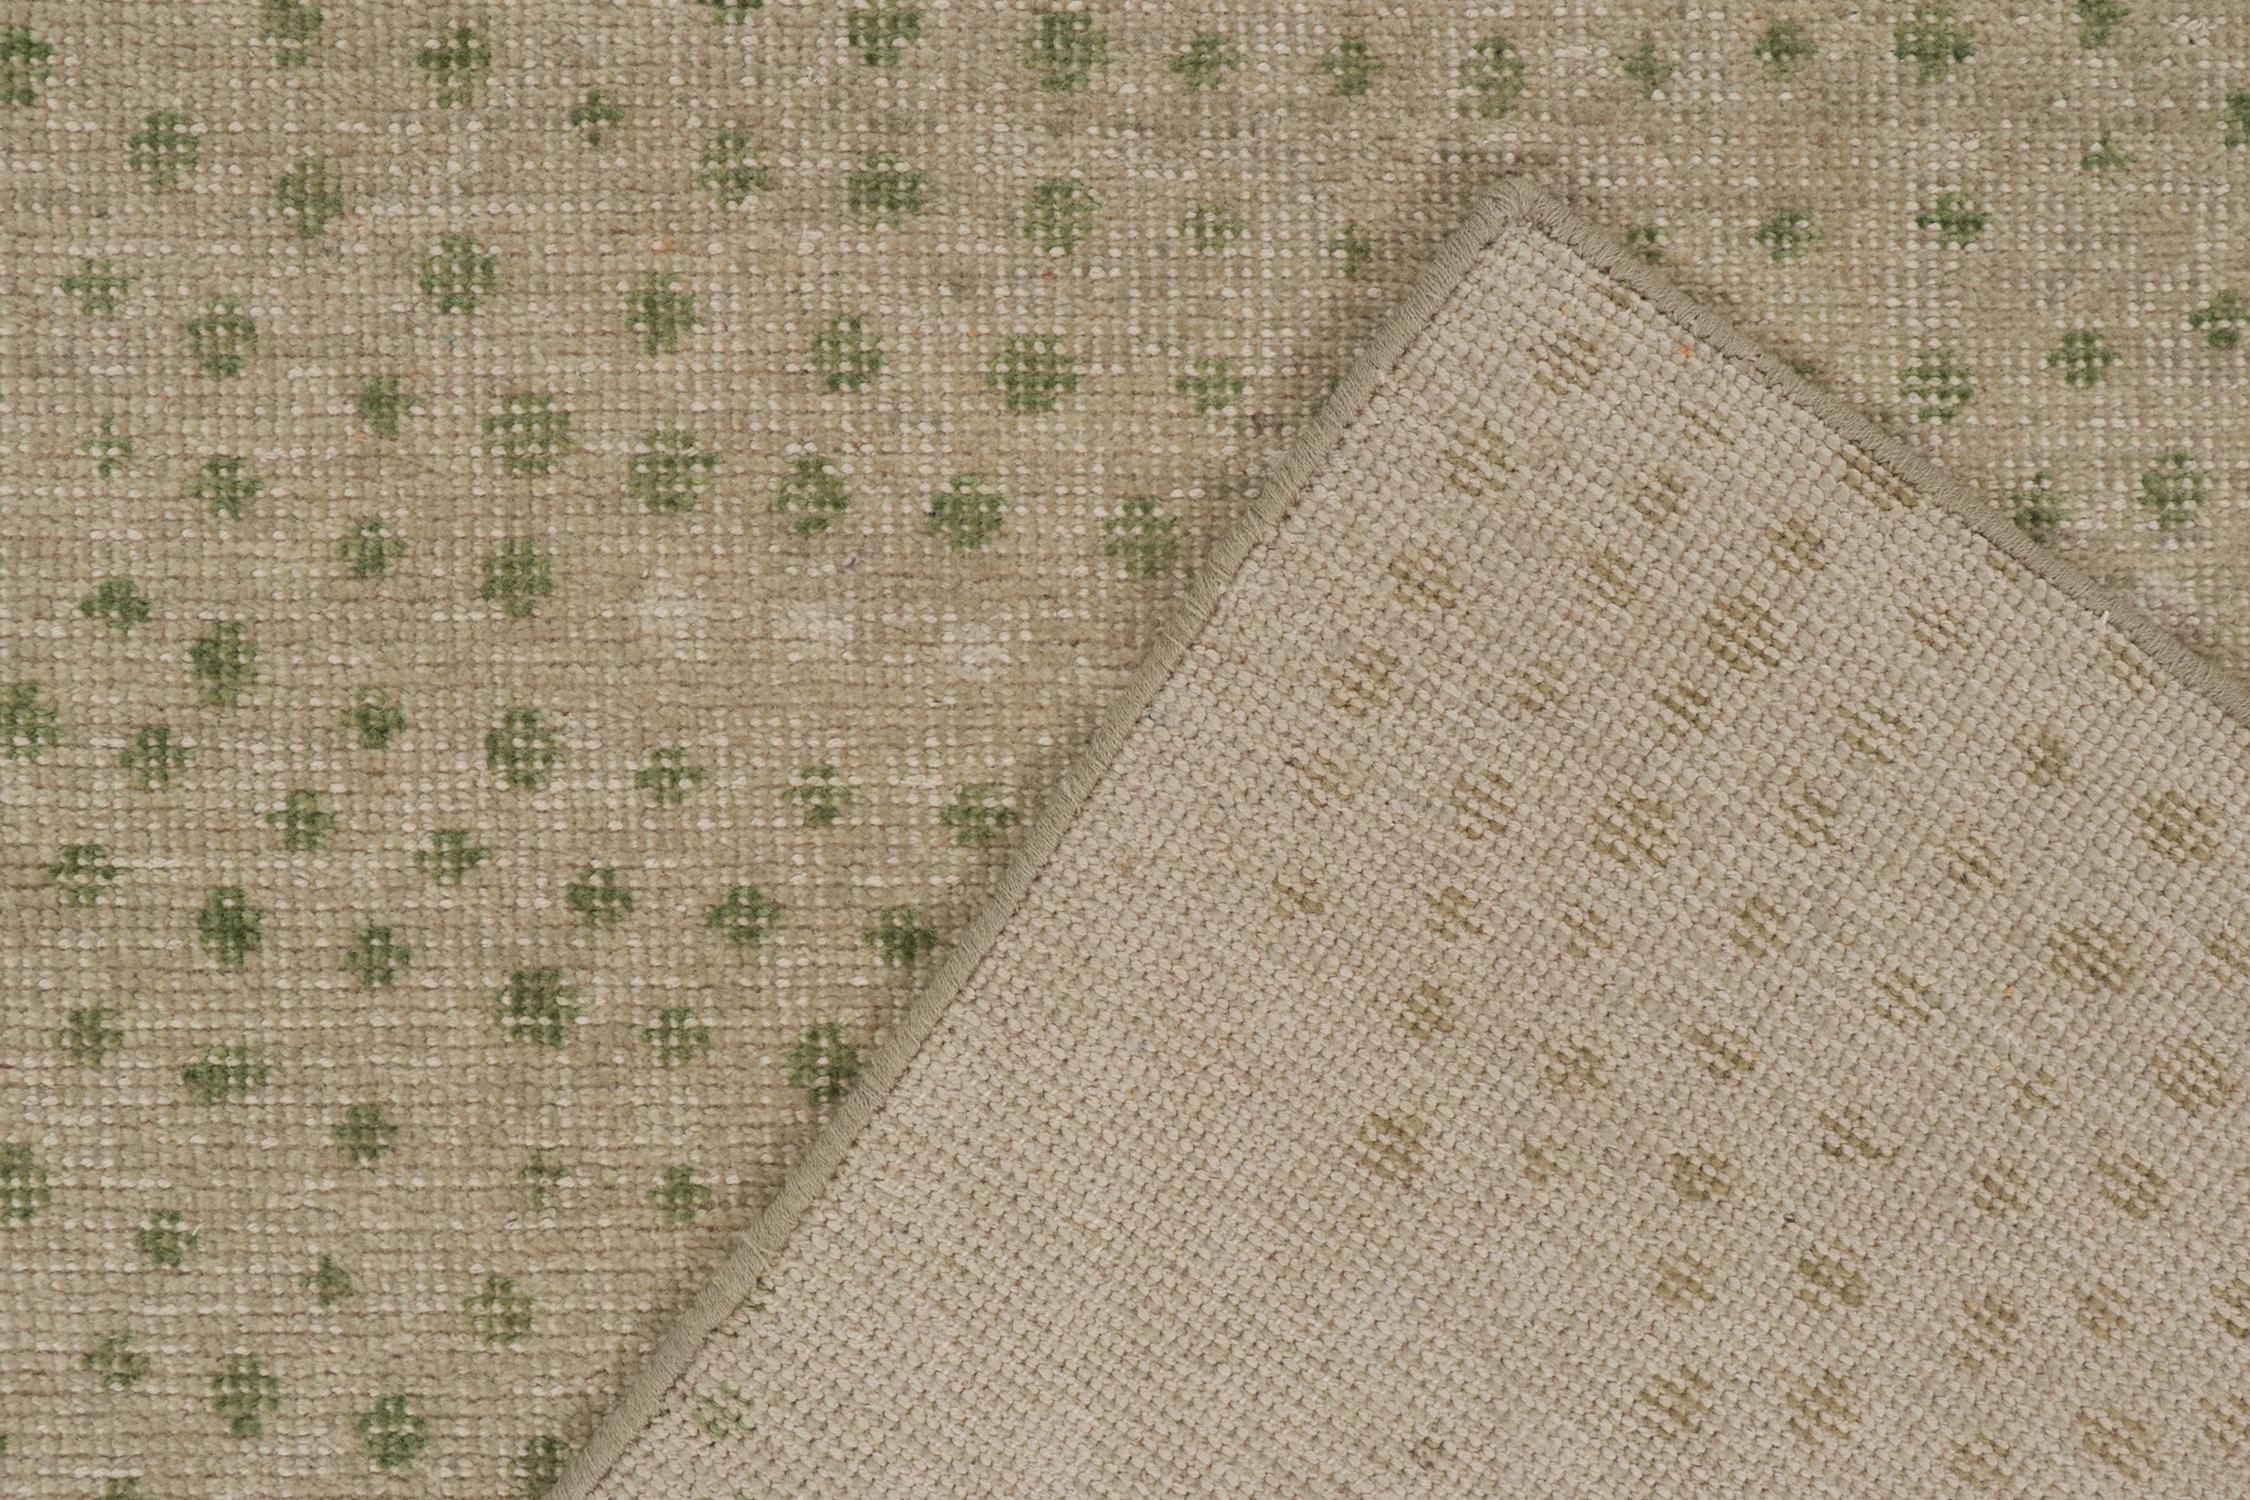 Contemporary Rug & Kilim’s Distressed Style Extra-Long Runner in Beige with Green Dot Pattern For Sale